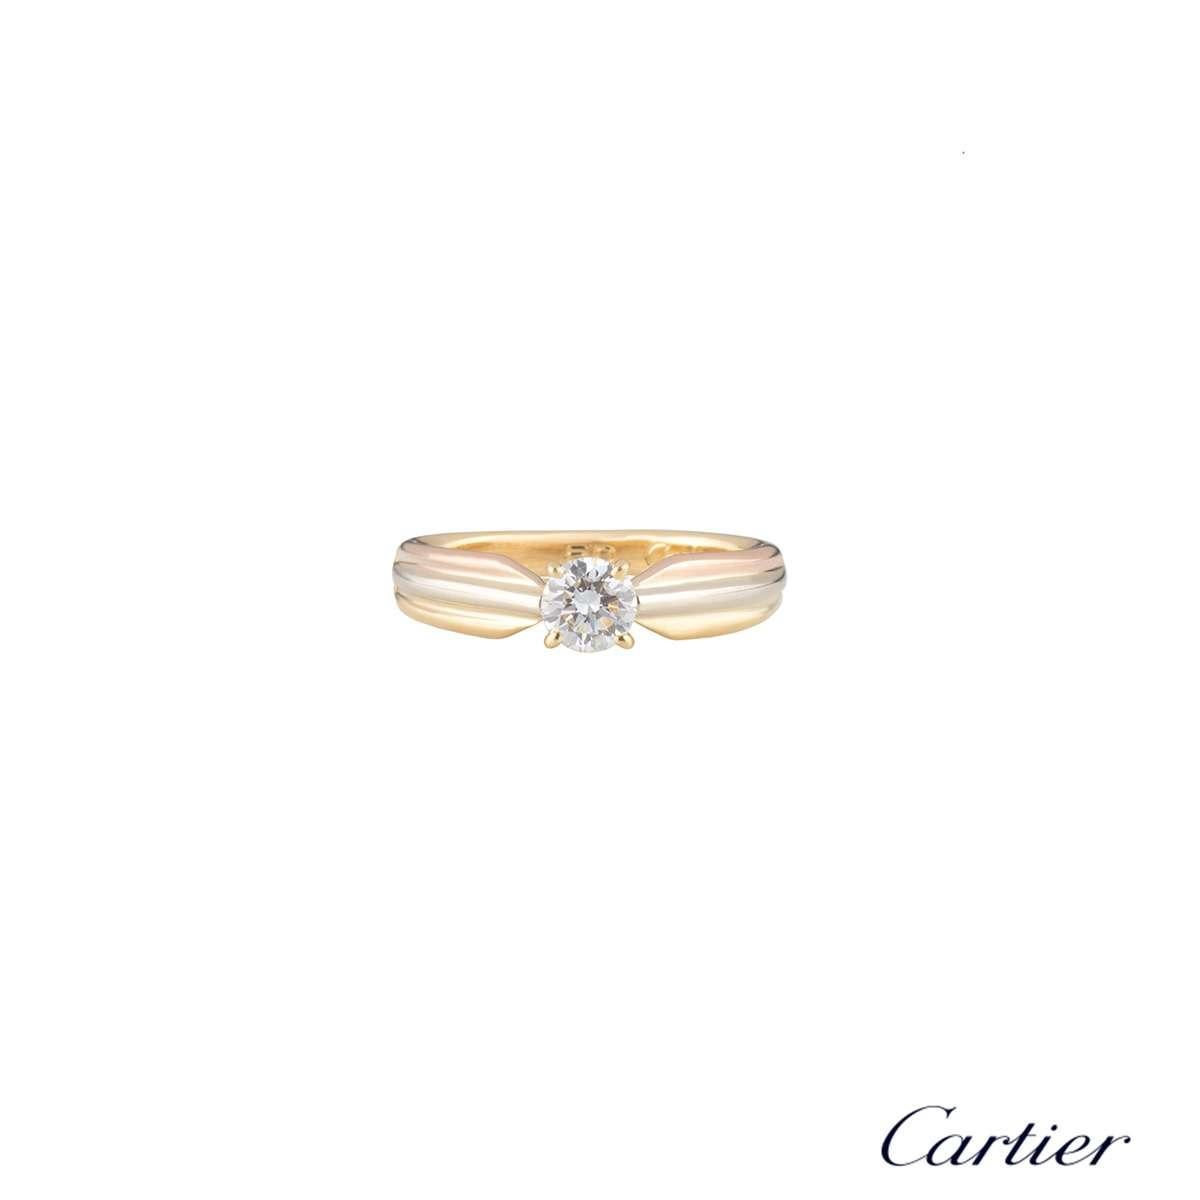 An 18k tri-colour gold diamond ring from the Trinity de Cartier collection. The ring is set to the centre with a 0.34ct round brilliant cut diamond, E-F colour and VVS2 in clarity. The diamond is set within a classic 4 claw setting with the band